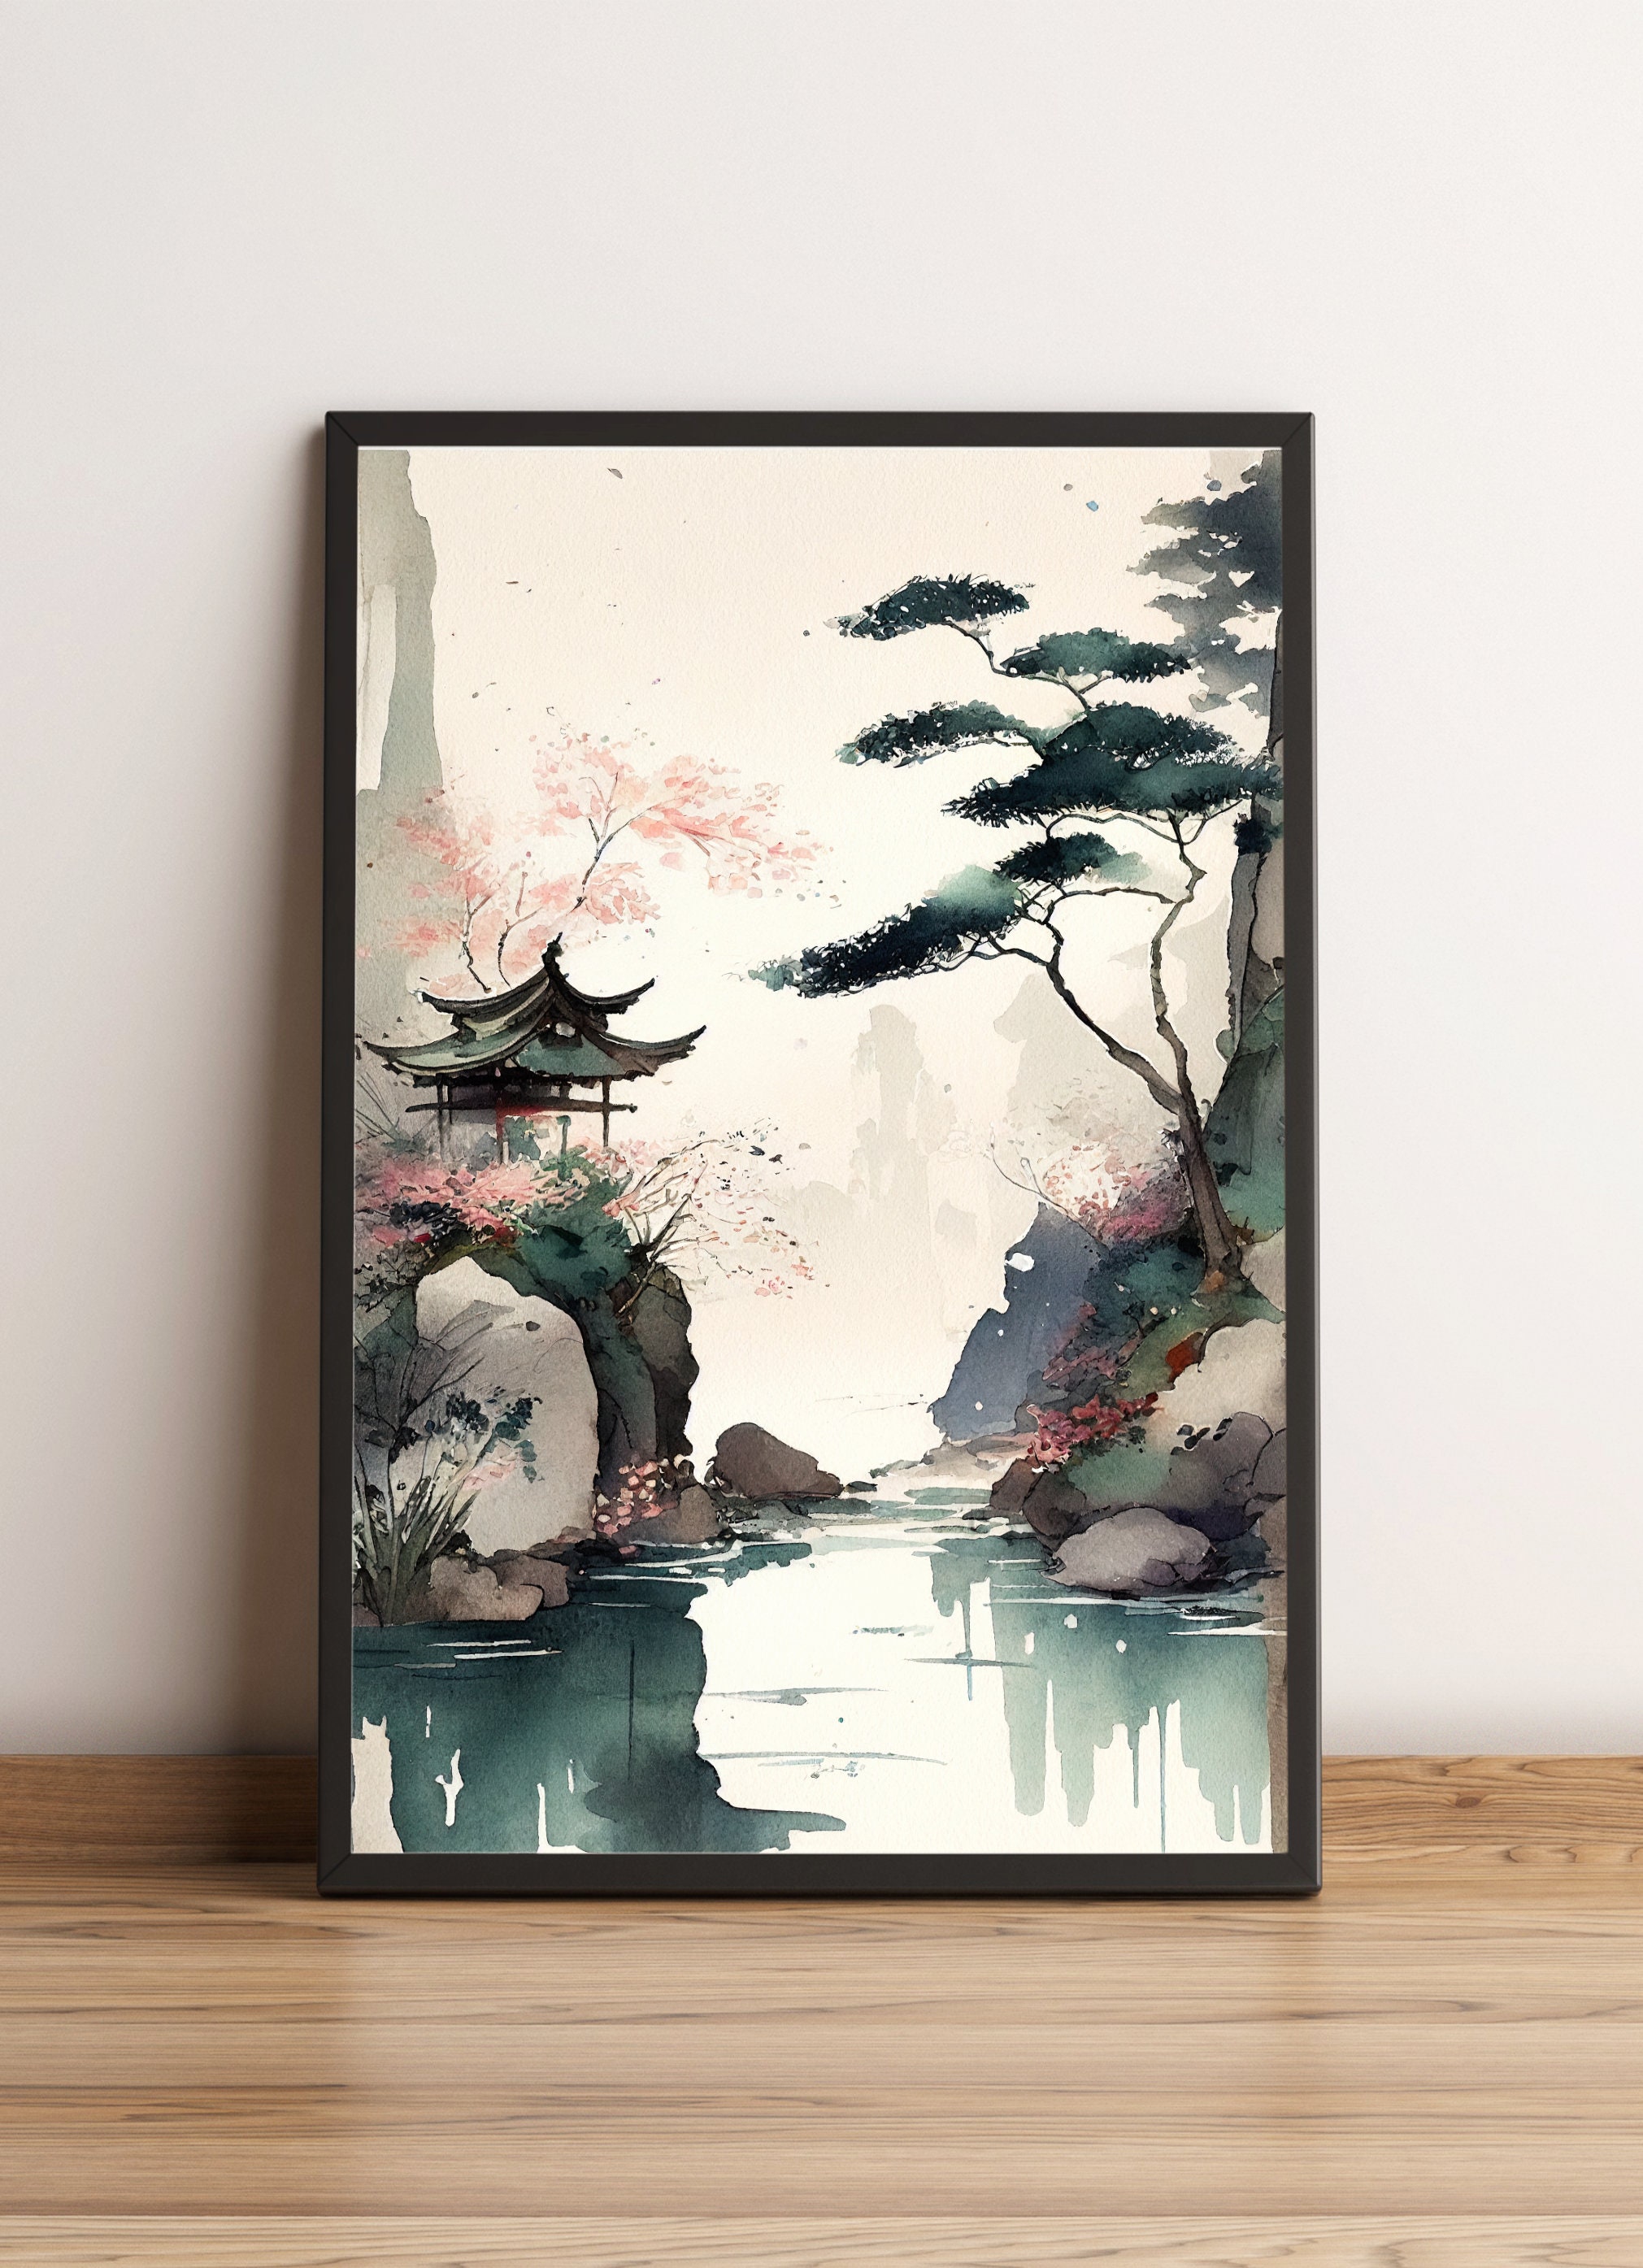 Discover Peaceful Pagoda Temple in Lake Poster, Print, Wall Art